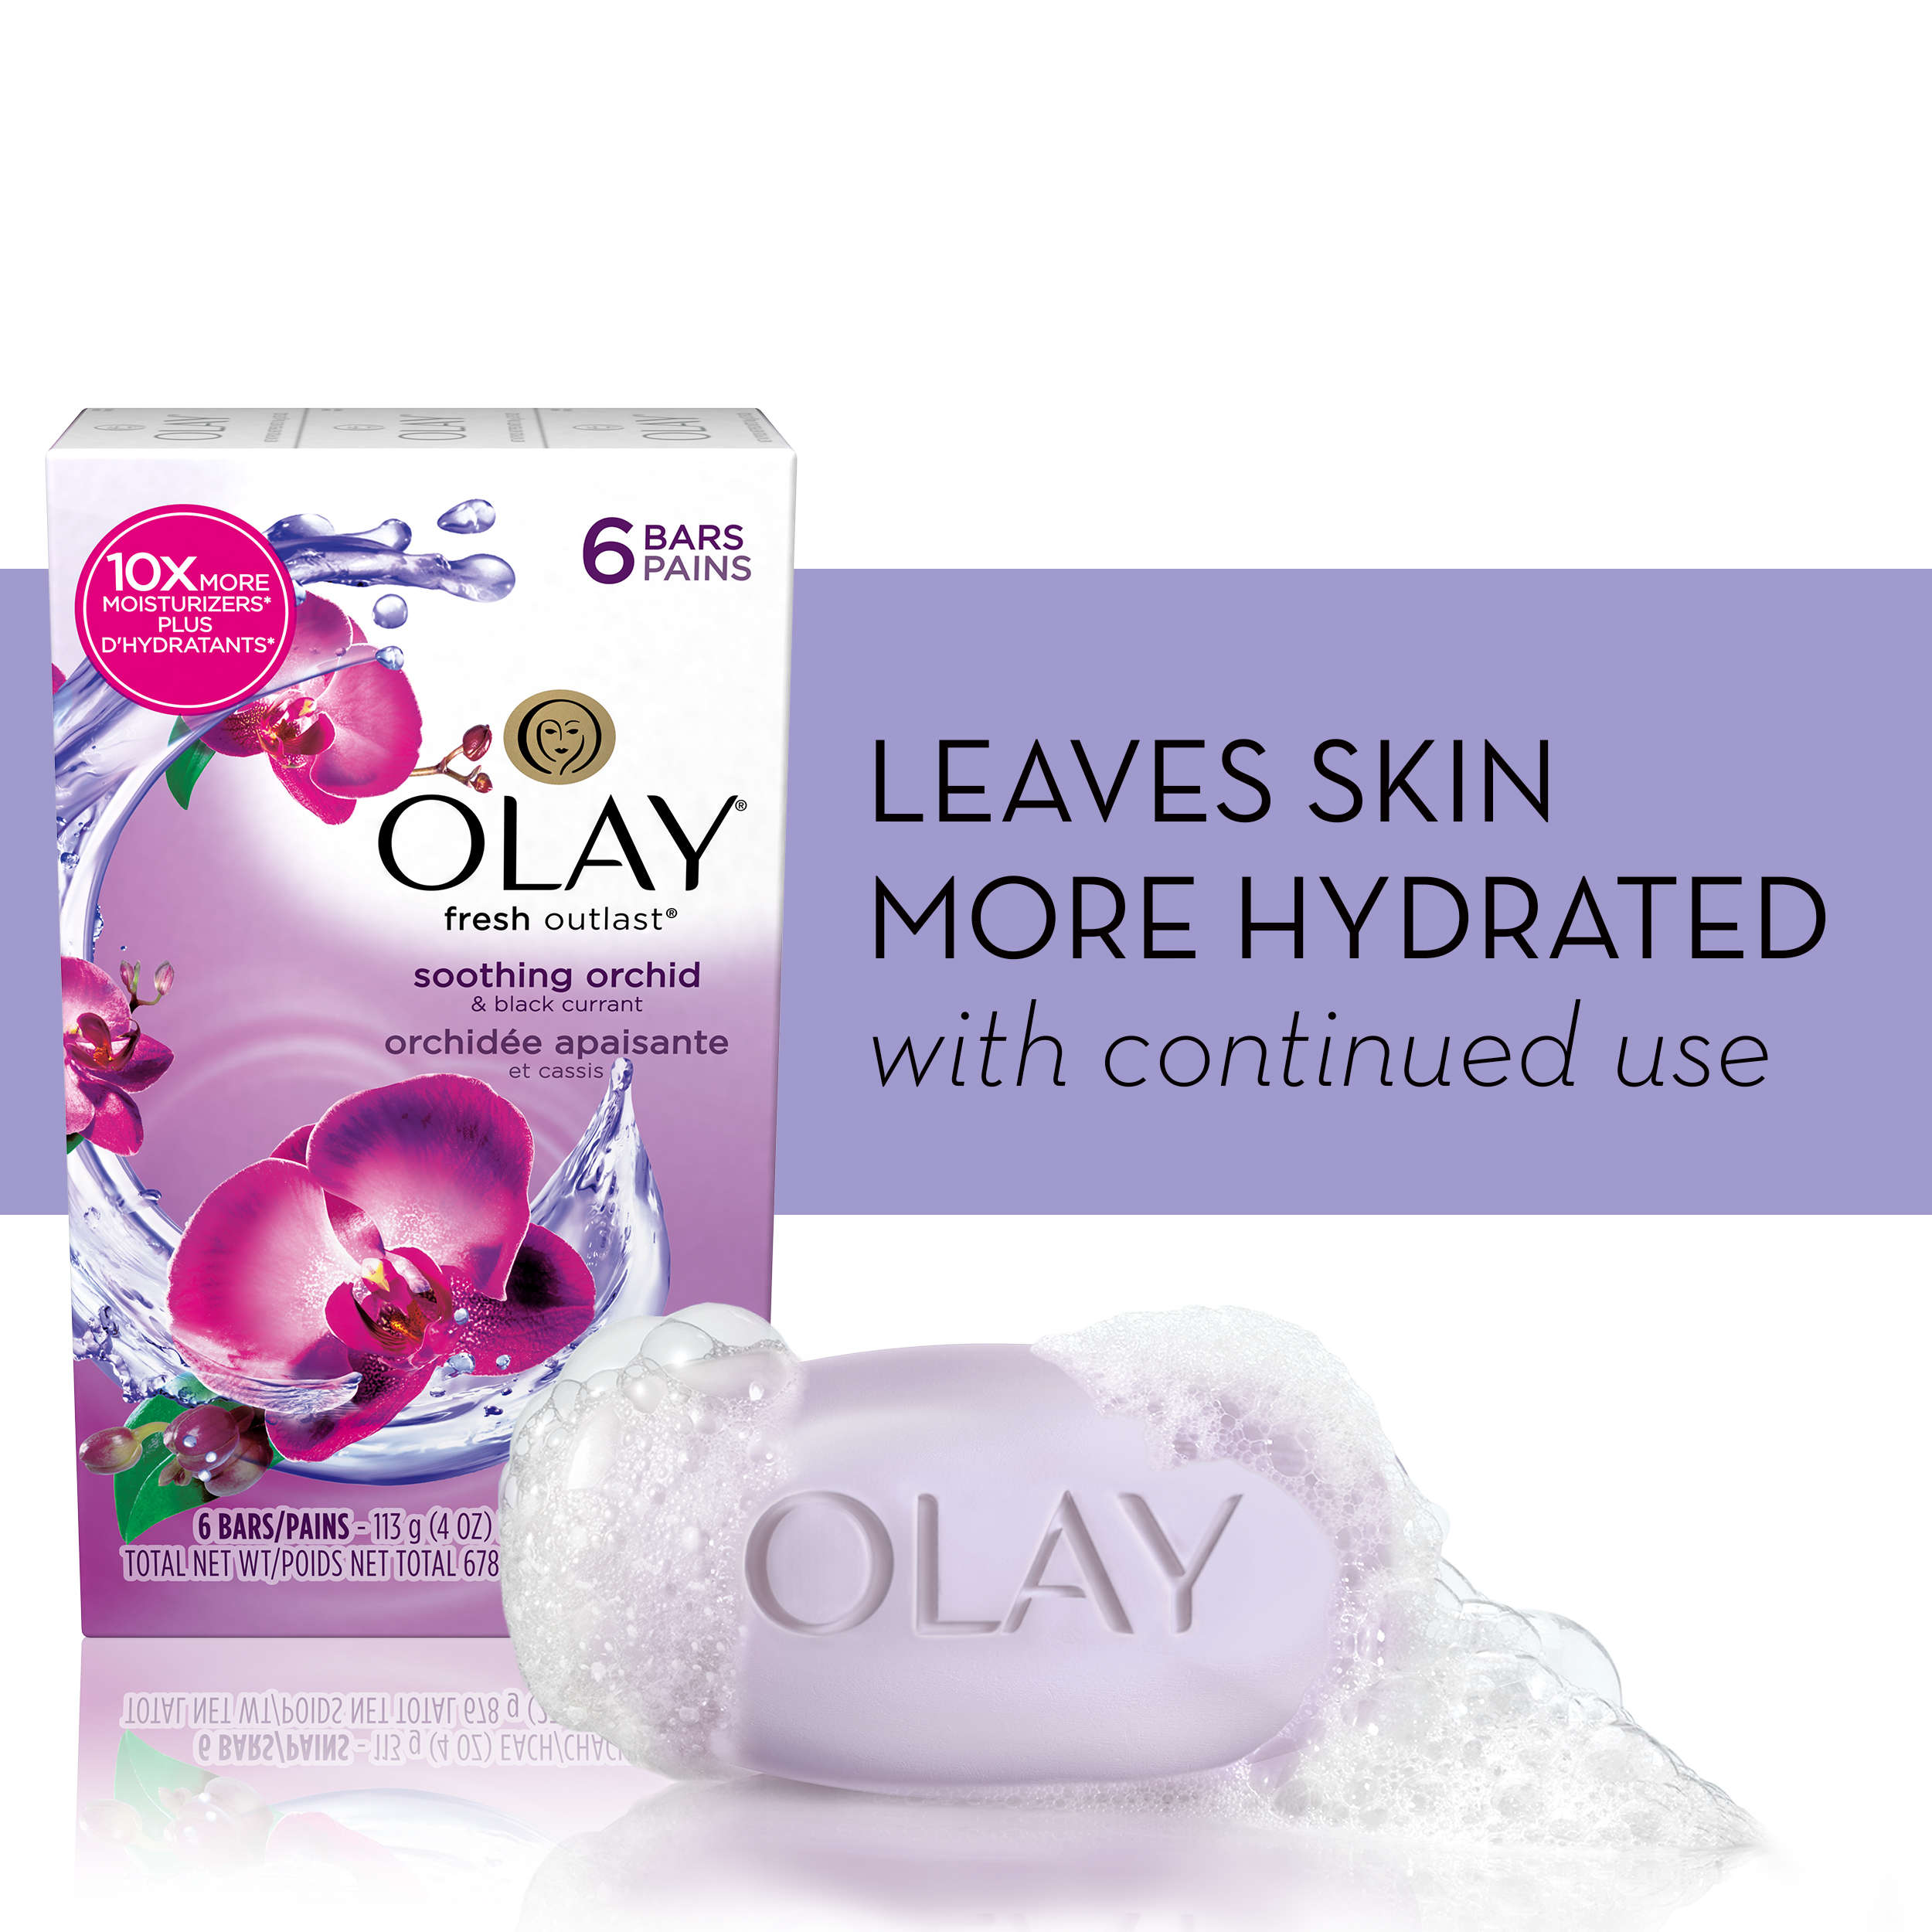 Olay Fresh Outlast Soothing Orchid & Black Currant Beauty Bar 4 oz, 6 count - image 5 of 8